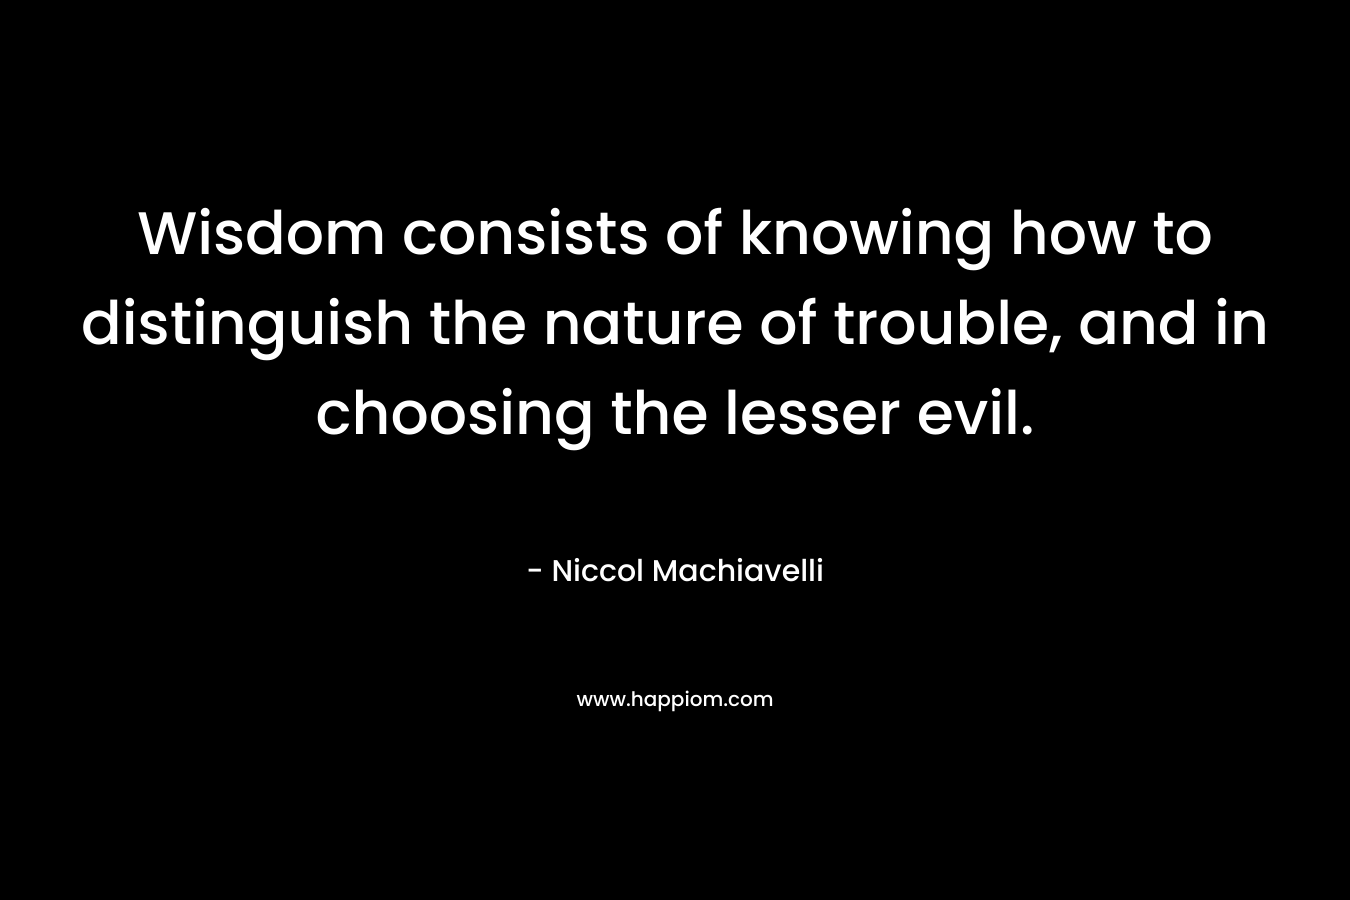 Wisdom consists of knowing how to distinguish the nature of trouble, and in choosing the lesser evil.